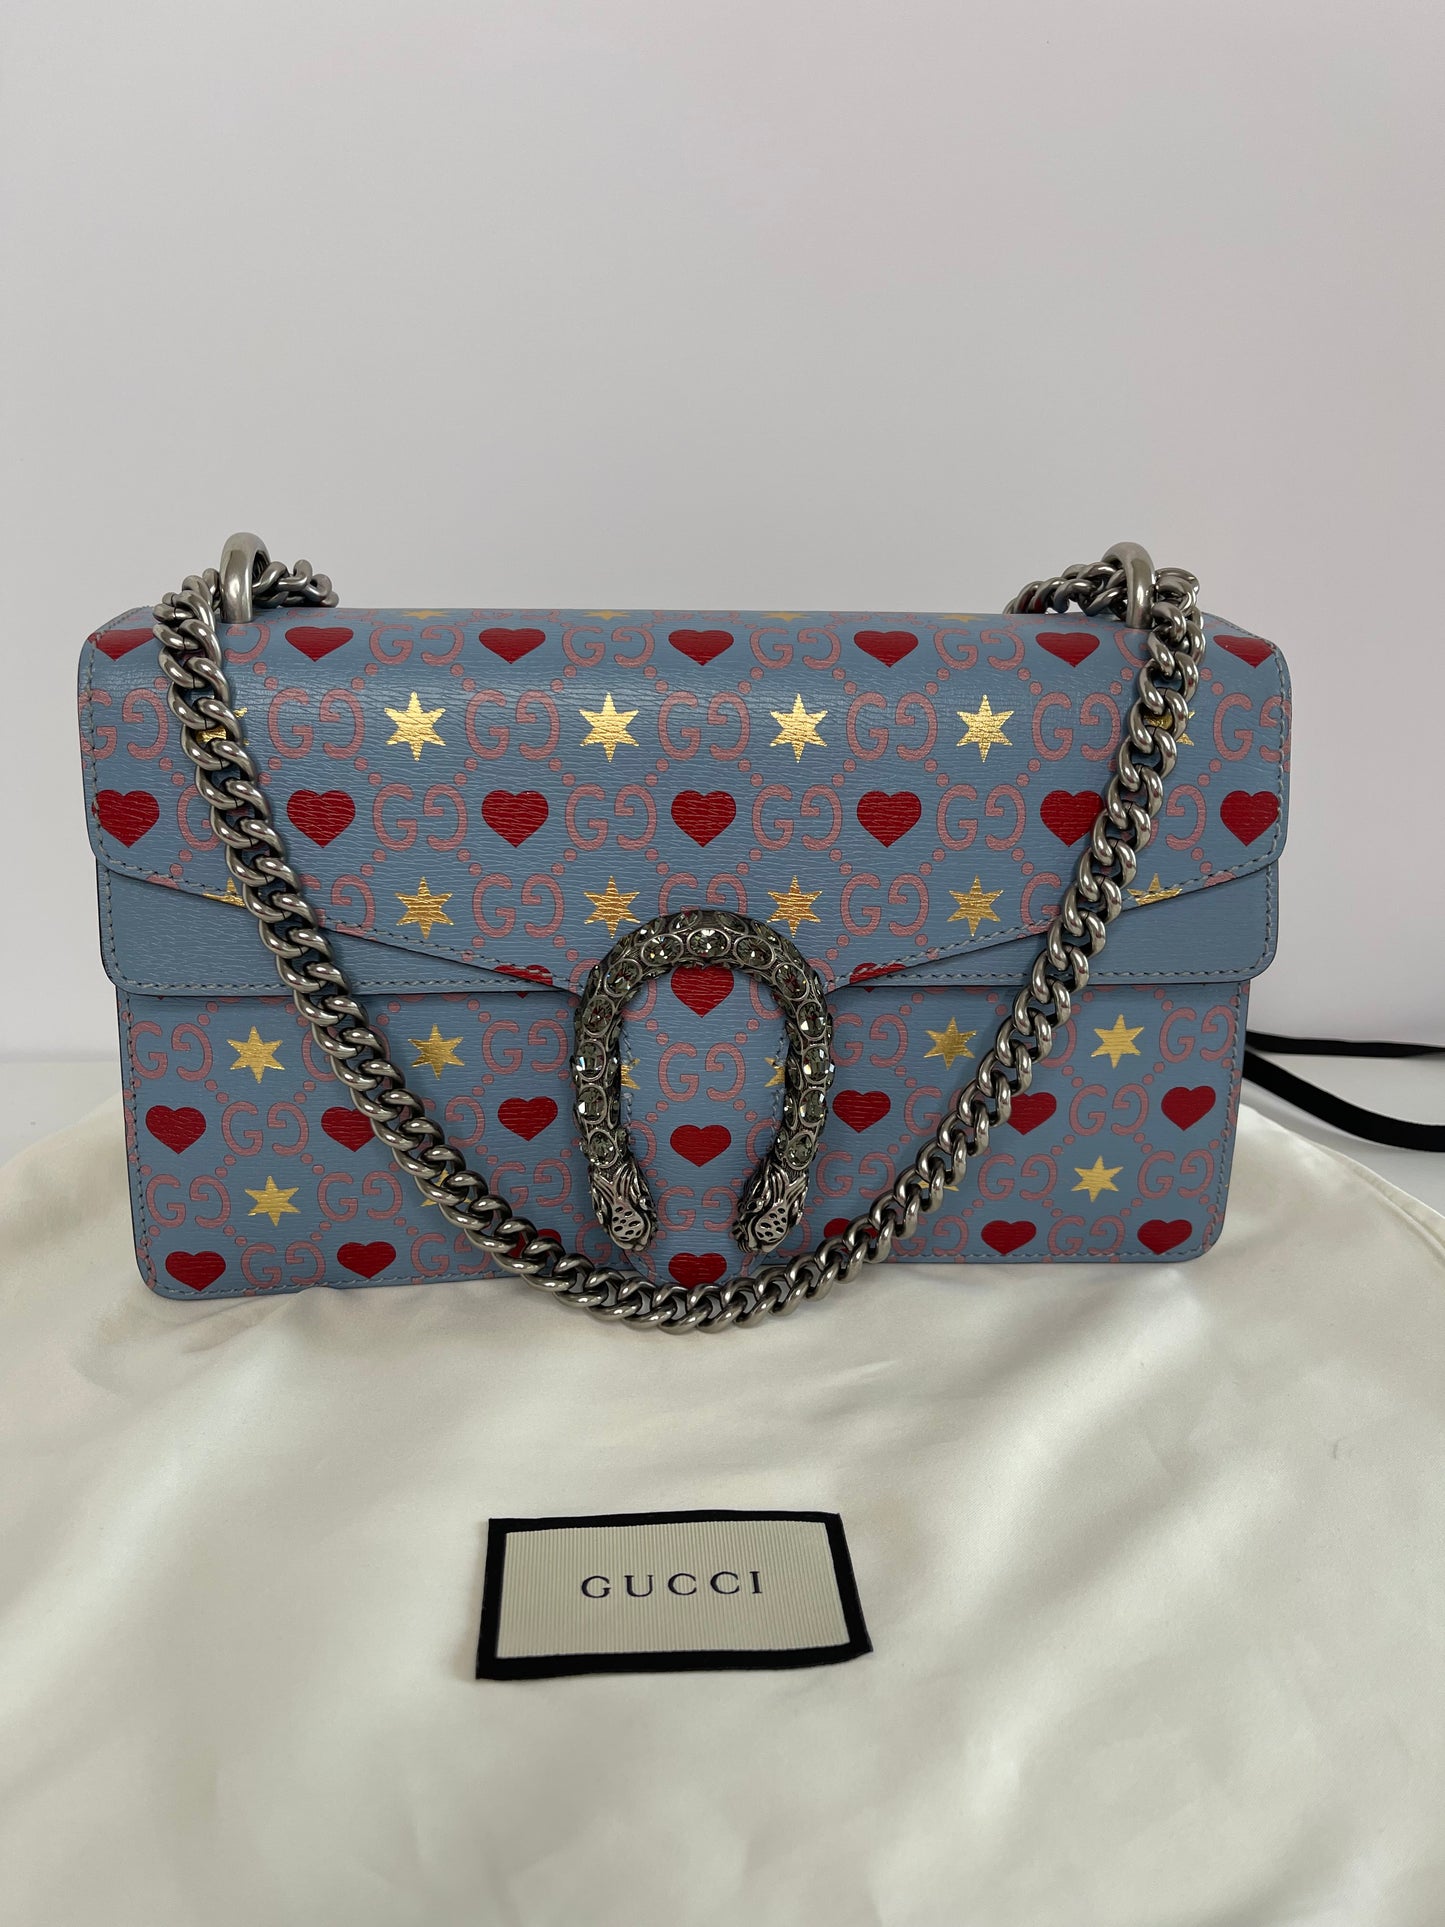 Gucci Small Dionysus Leather Hearts Stars Exclusive Valentine's Day Limited Edition Bag